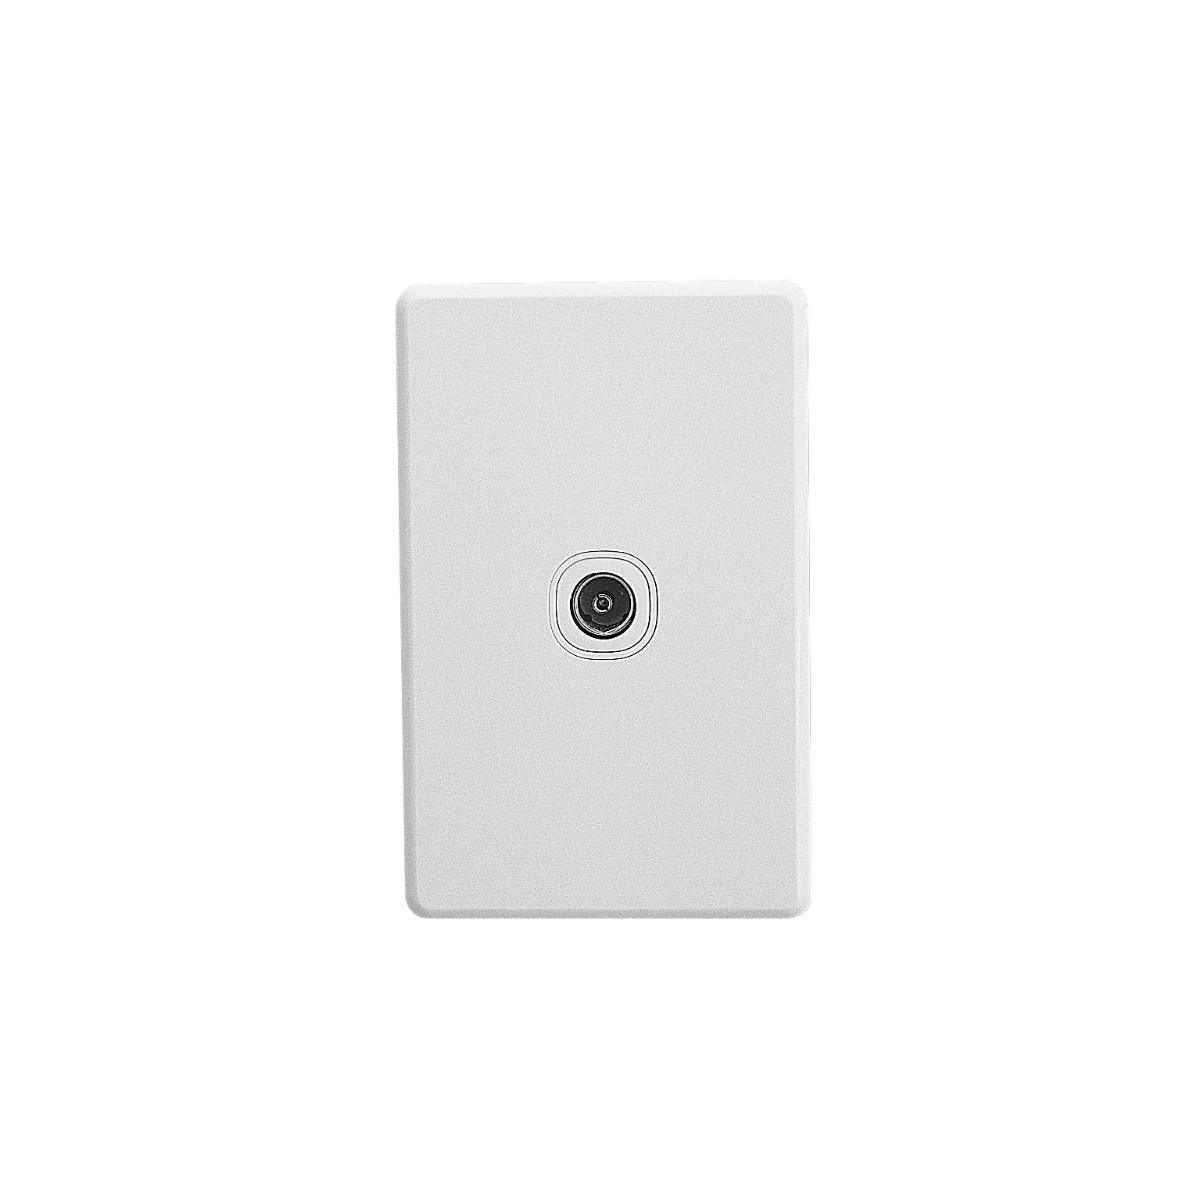 OUTLET SOCKET 1G TV COAXIAL 75 OHM WHITE